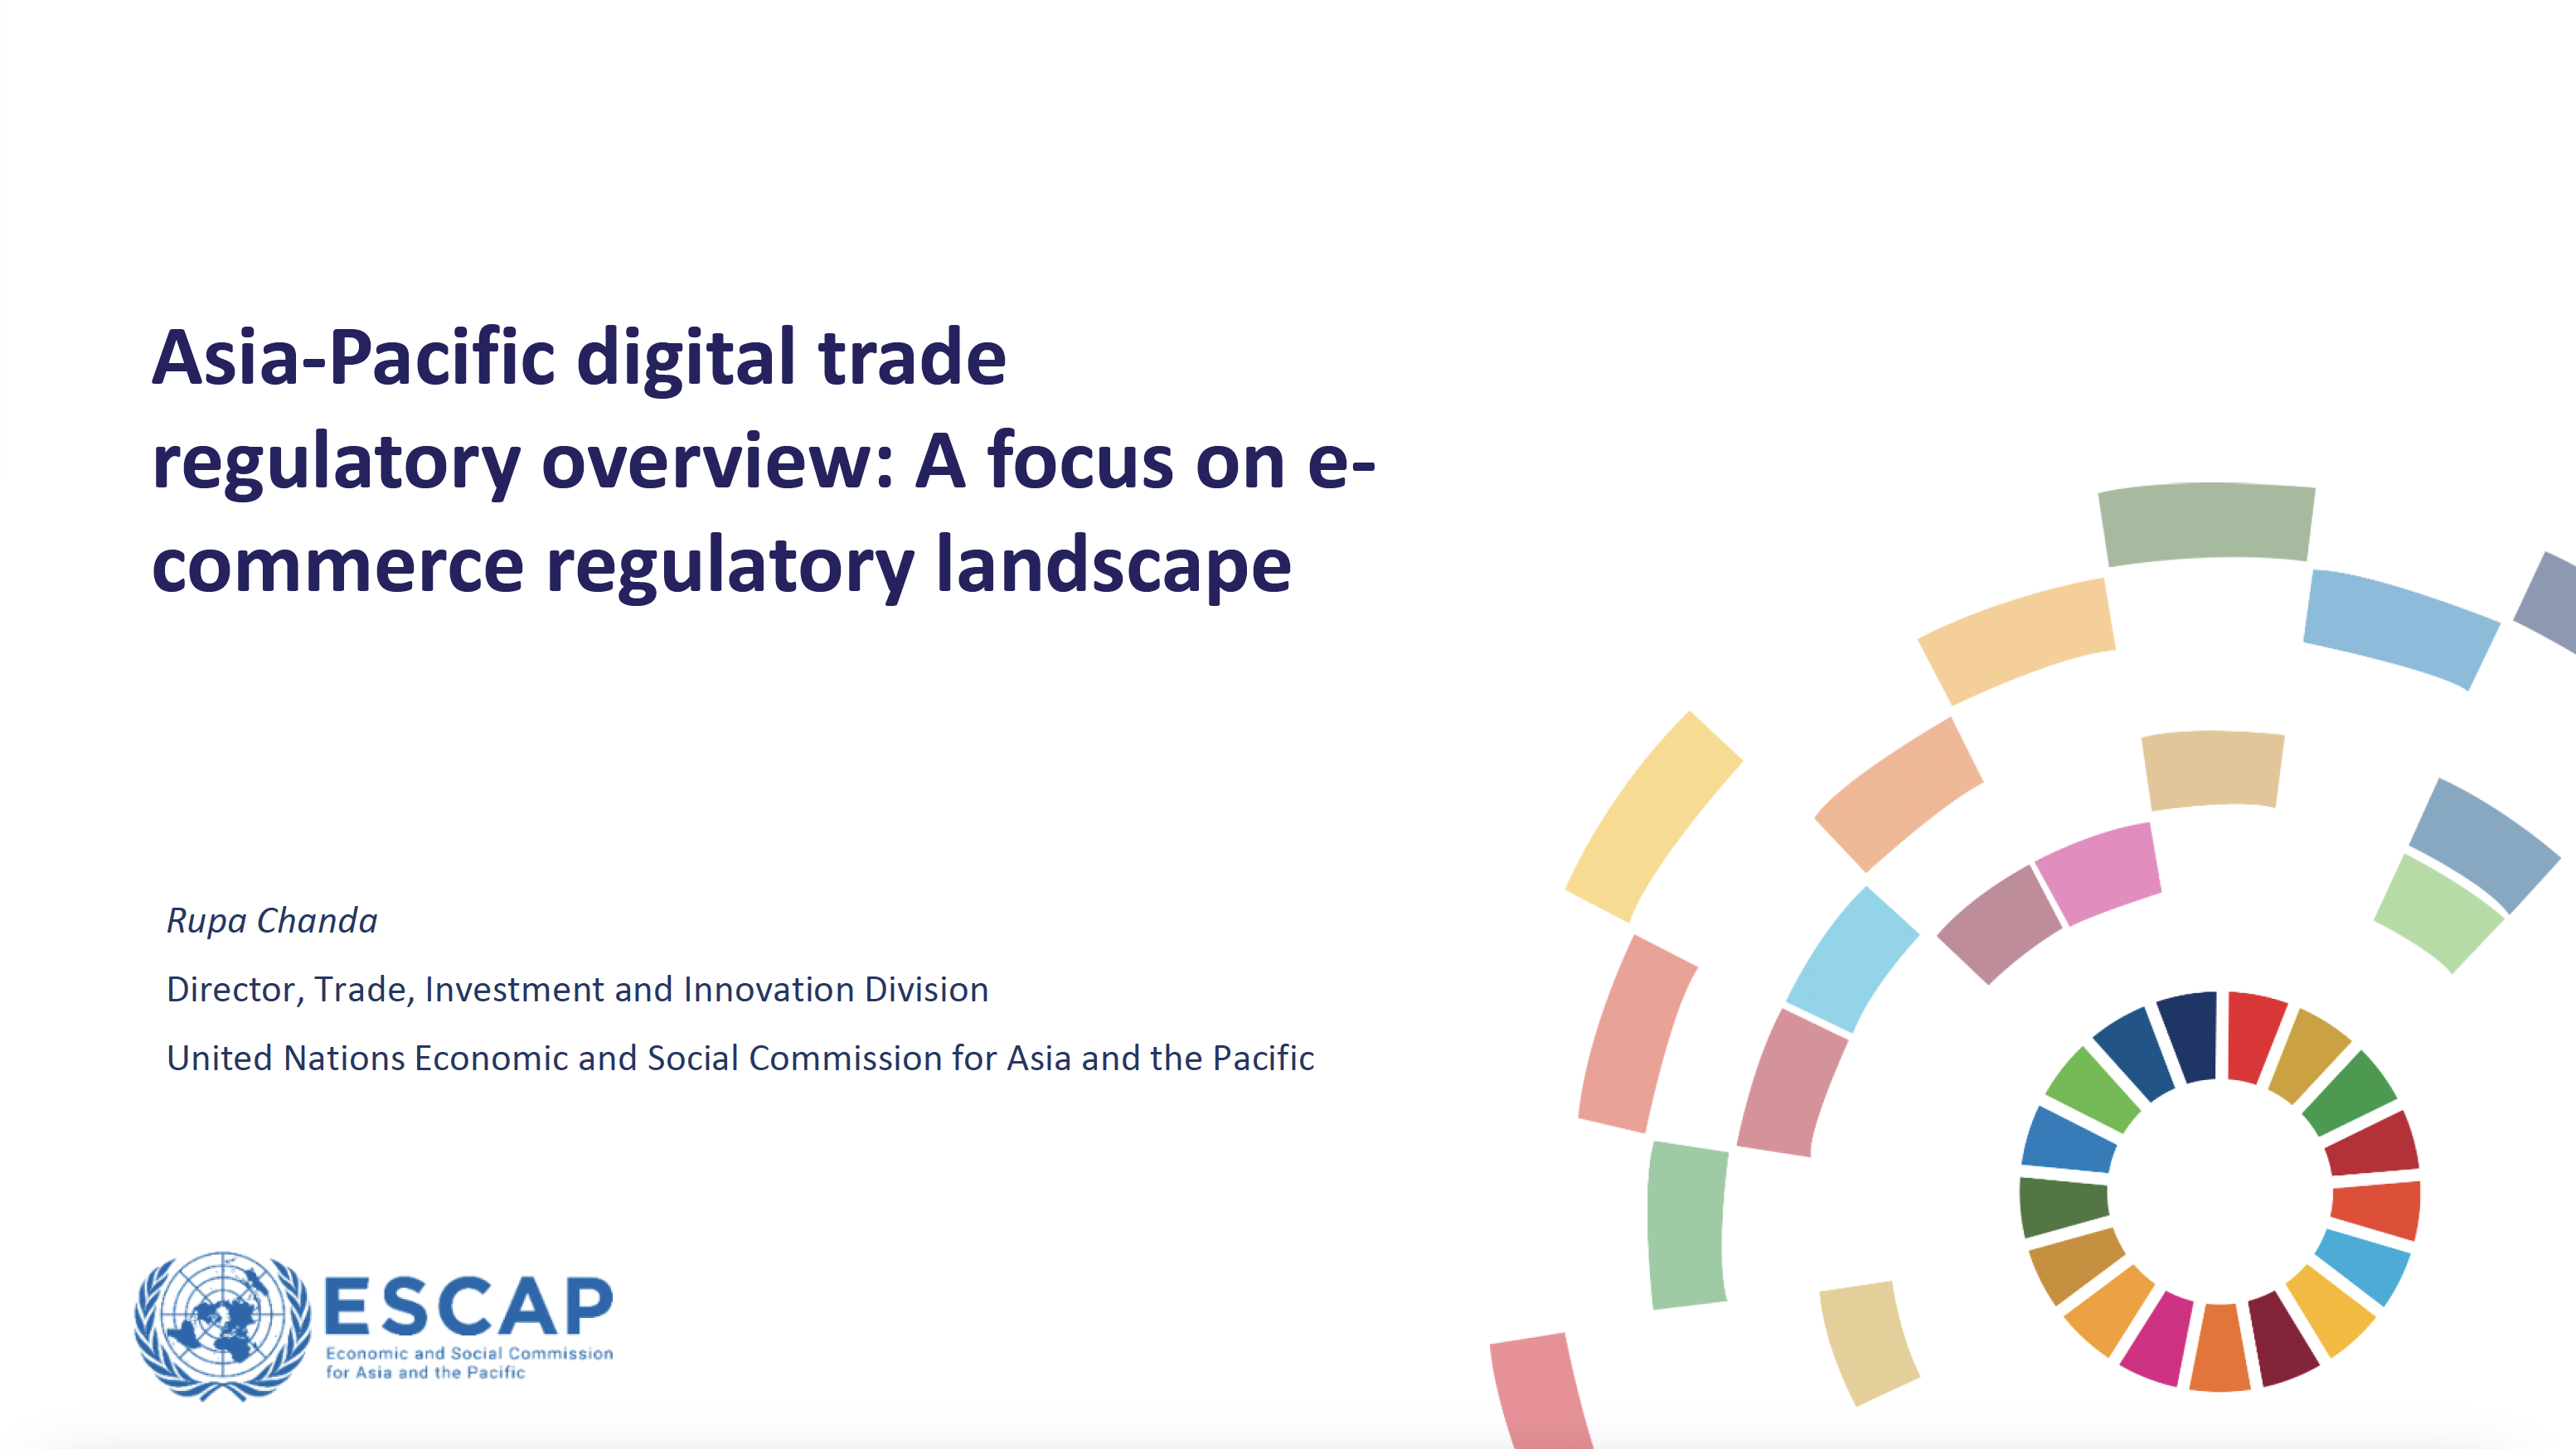 Dr. Rupa Chanda, Director of Trade, Investment, and Innovation, UNESCAP on ‘Regional digital trade integration index-an overview of where countries stand on digital trade related regulations’